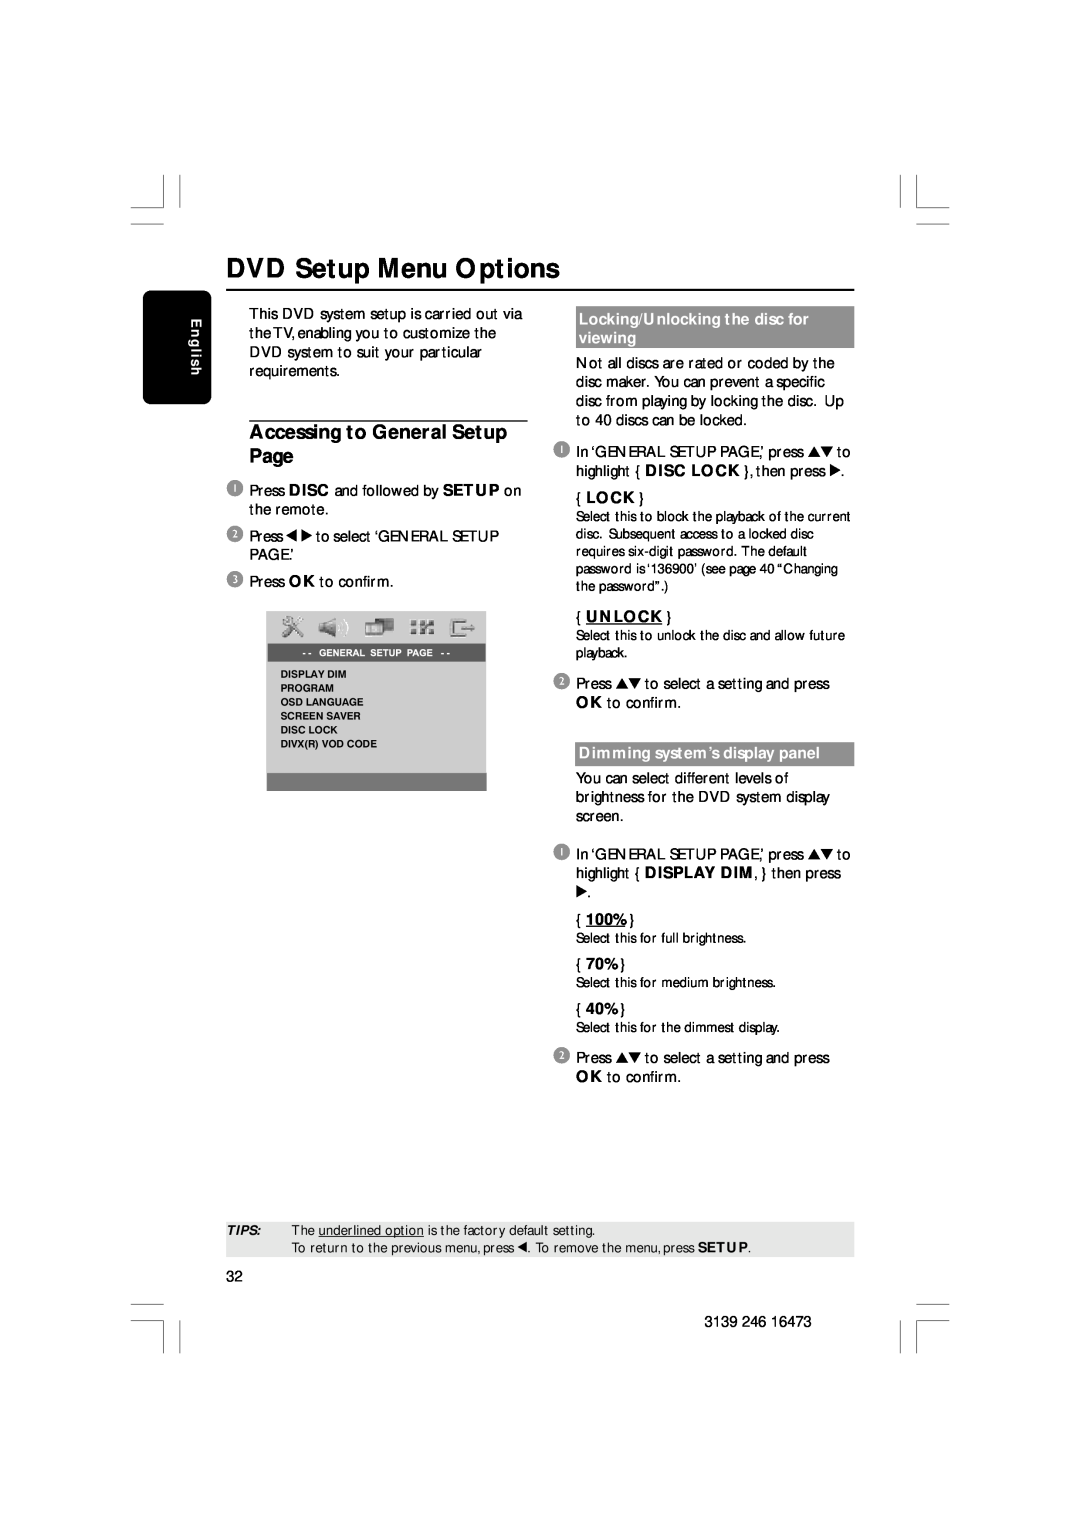 Philips HTS5510C DVD Setup Menu Options, Accessing to General Setup Page, Locking/Unlocking the disc for viewing, 100% 